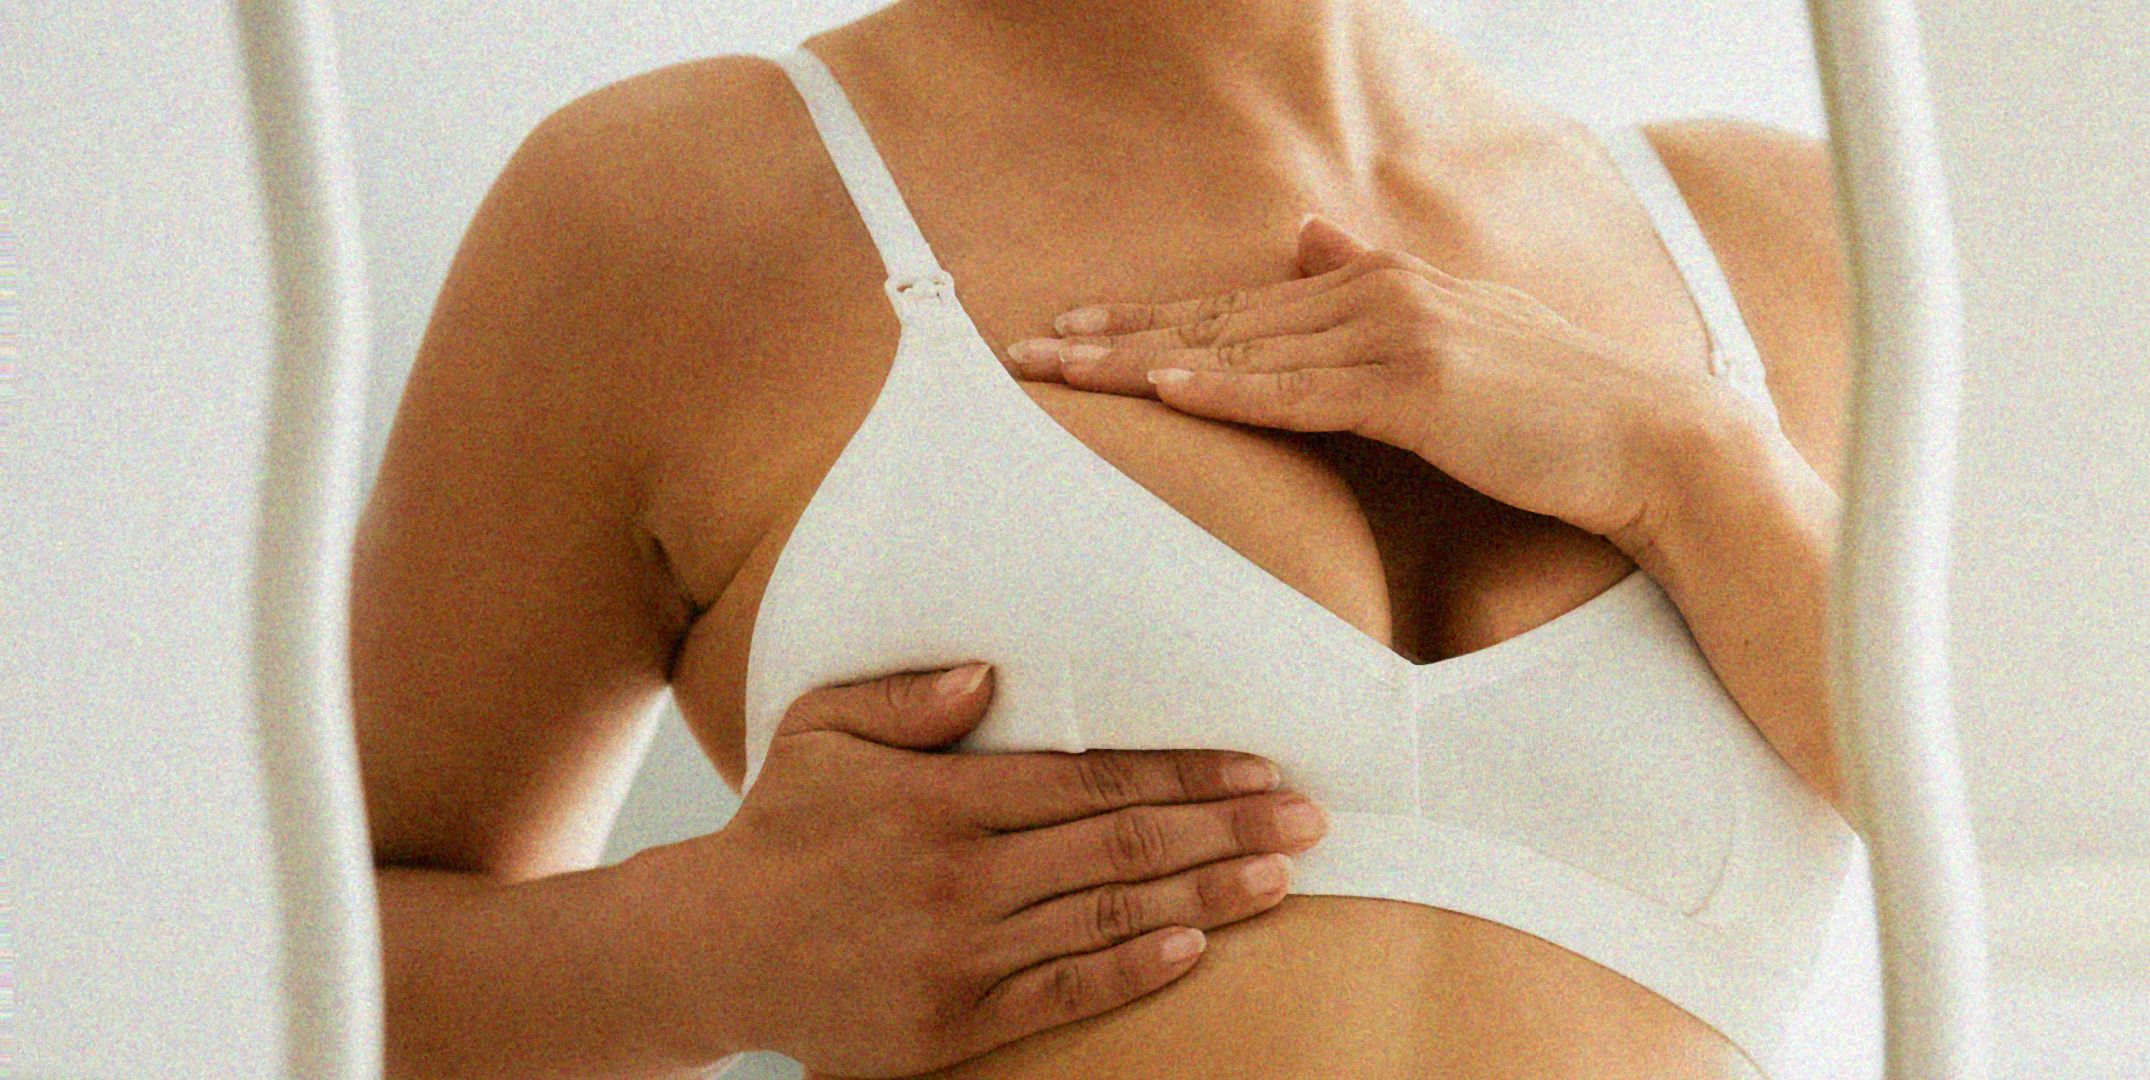 How to check boobs for cancer lumps and other breast cancer symptoms